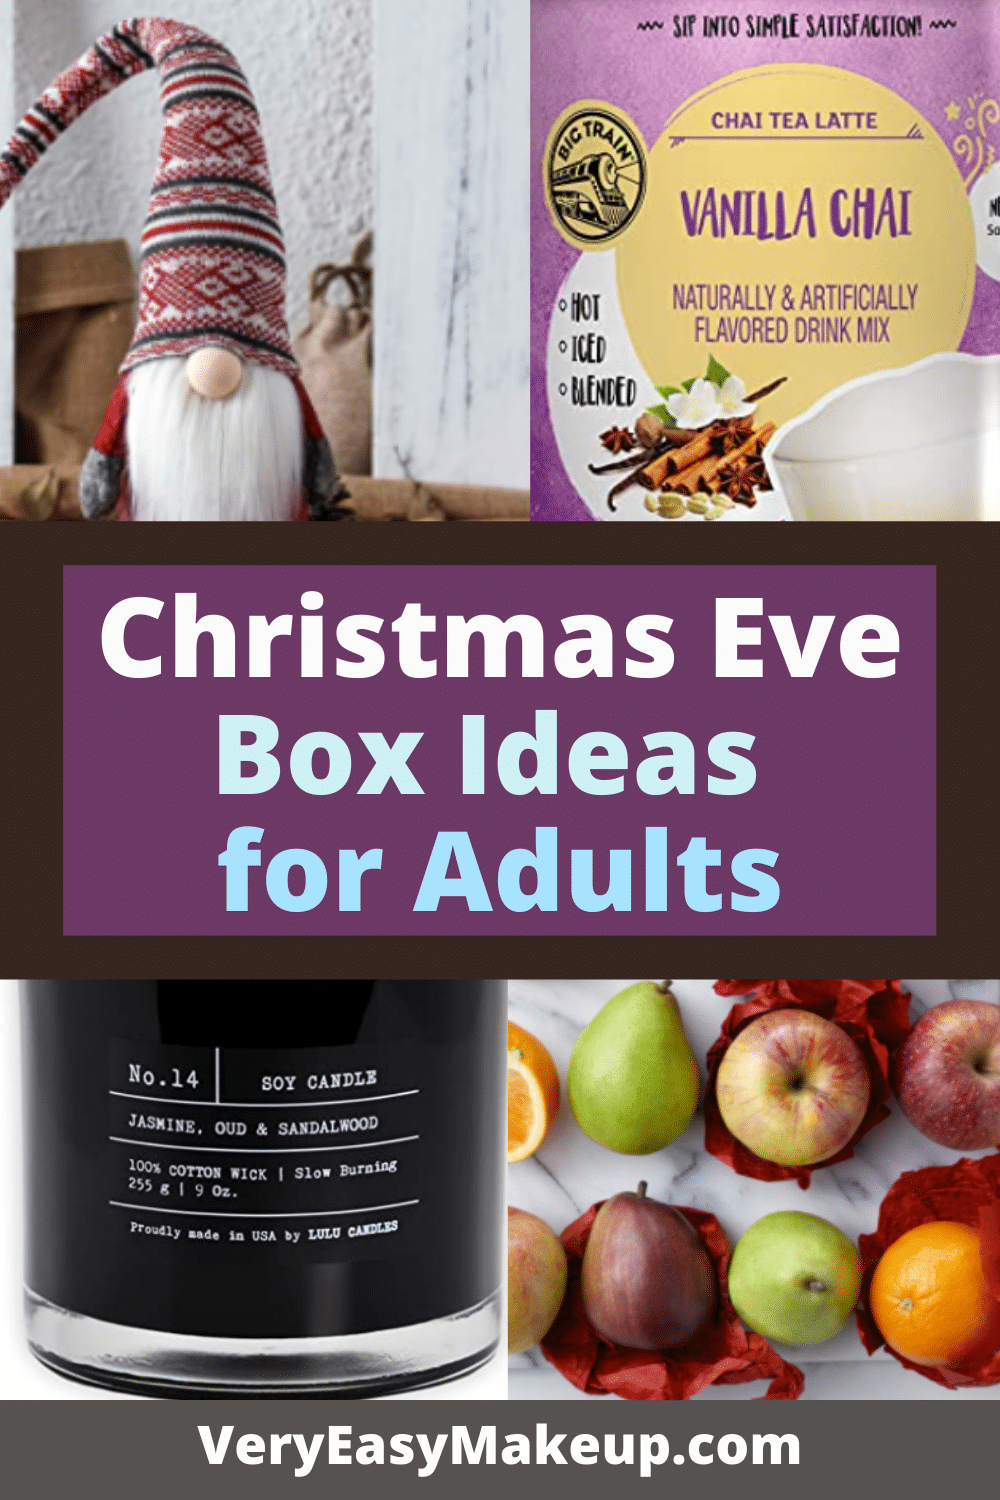 Christmas Eve Box Ideas for Adults by Very Easy Makeup